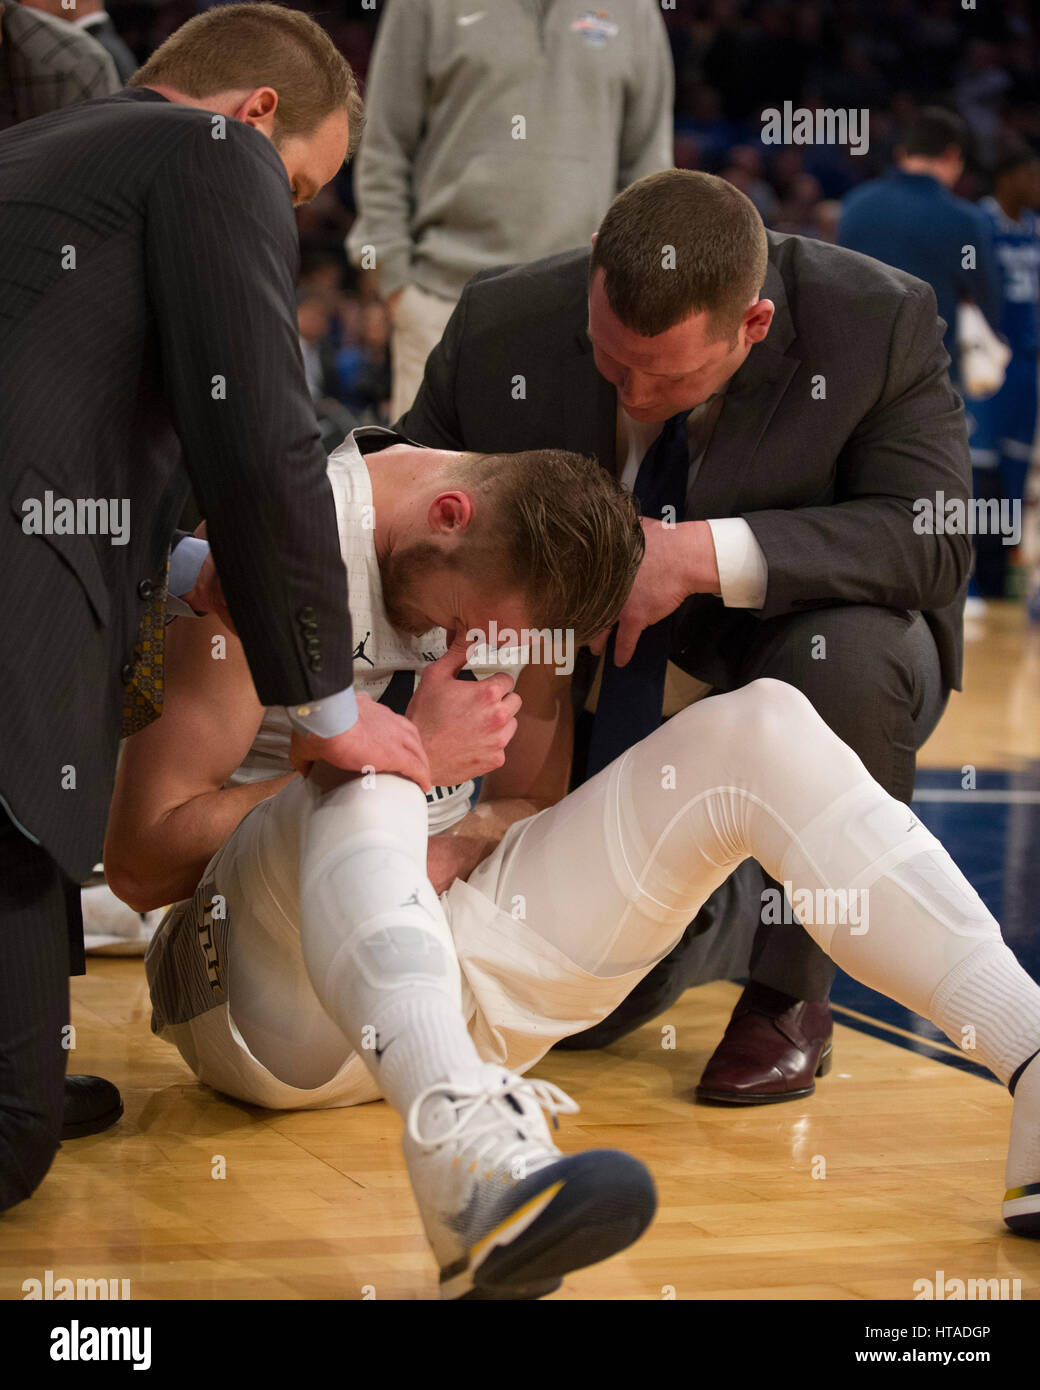 Madison Square Garden, New York, New York, USA. 09th Mar, 2017. Marquette Golden Eagles center Luke Fischer (40) is attended to after being injured at The 35th Big East Tournament during the game between The Seton Hall Pirates and The Marquette Golden Eagles at Madison Square Garden, New York, New York. The Seton Hall Pirates defeat The Marquette Golden Eagles 82-76. Mandatory credit: Kostas Lymperopoulos/CSM/Alamy Live News Stock Photo